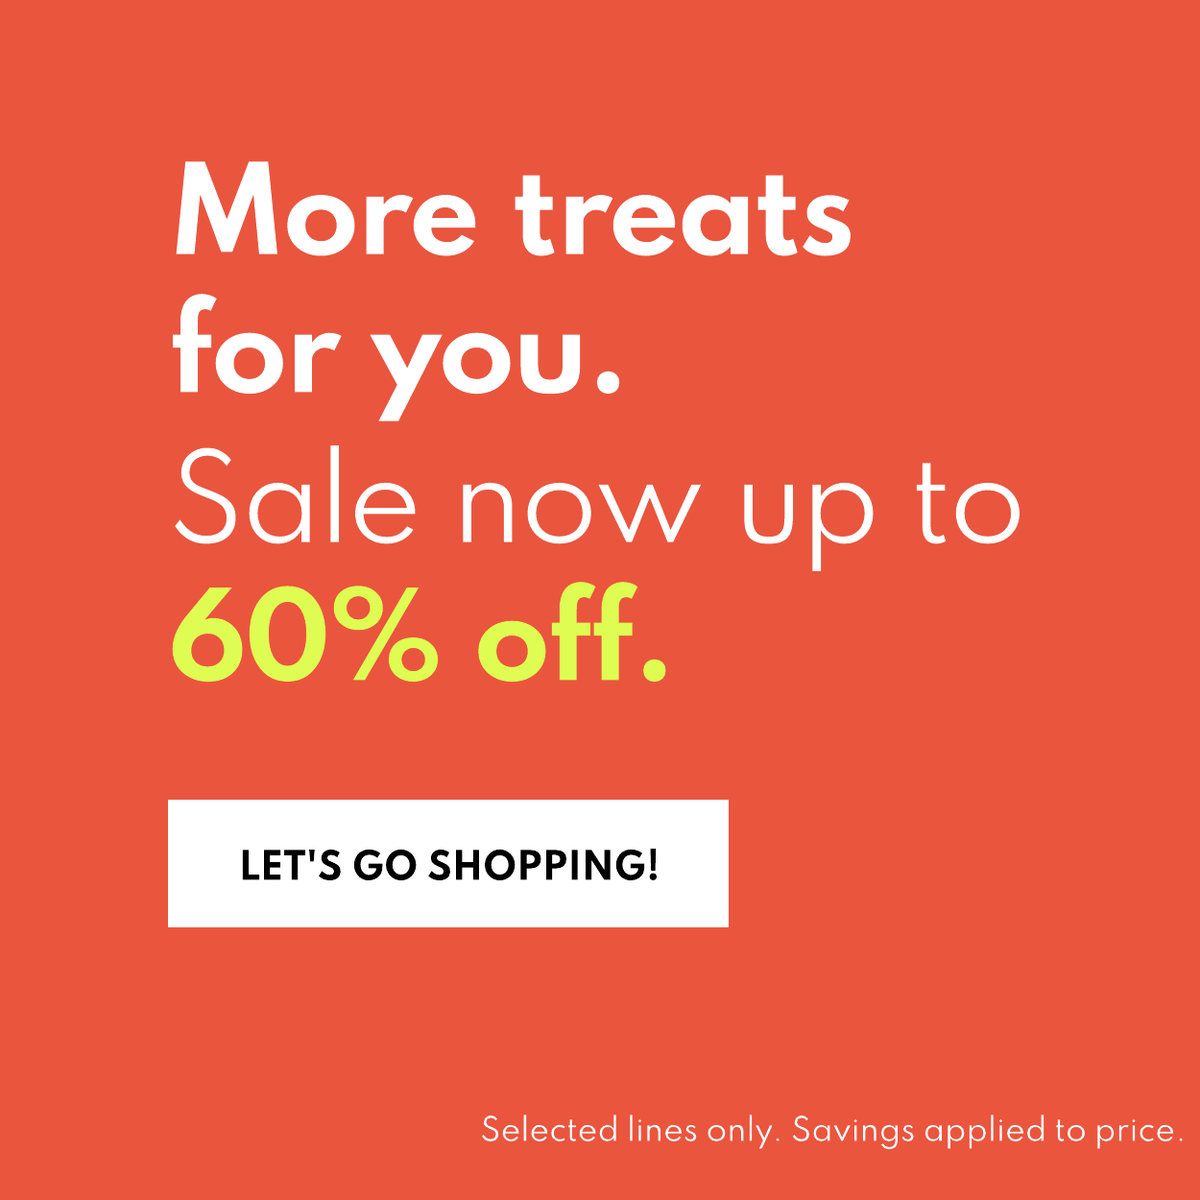 More treats for you. Sale now up to 60% off. Let's go shopping! Selected lines only. Savings applied to price.